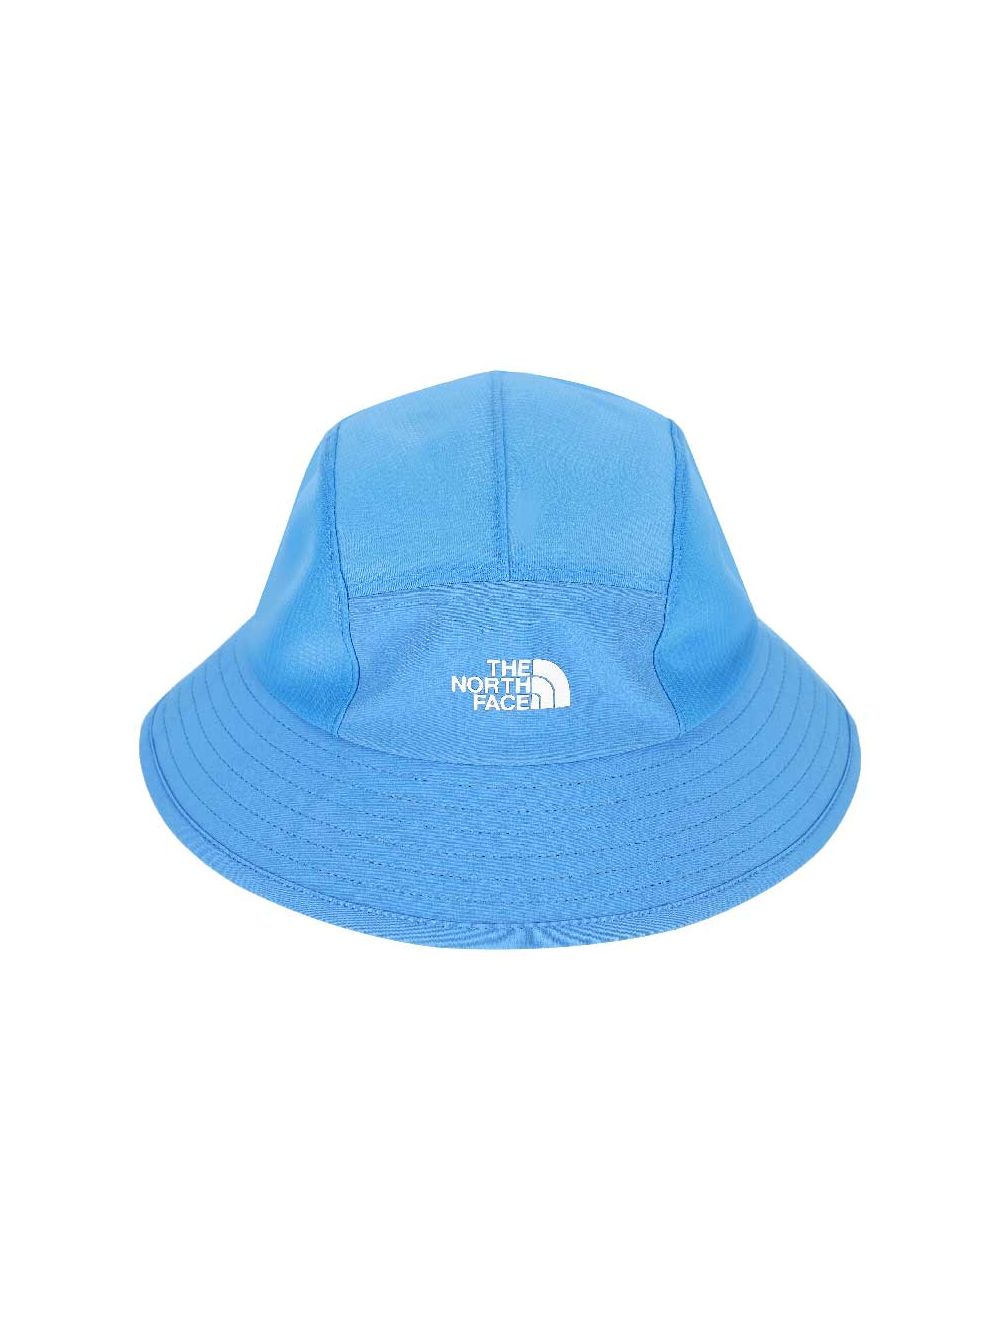 Shop The North Face Run Mens Bucket Hat Sonic Blue